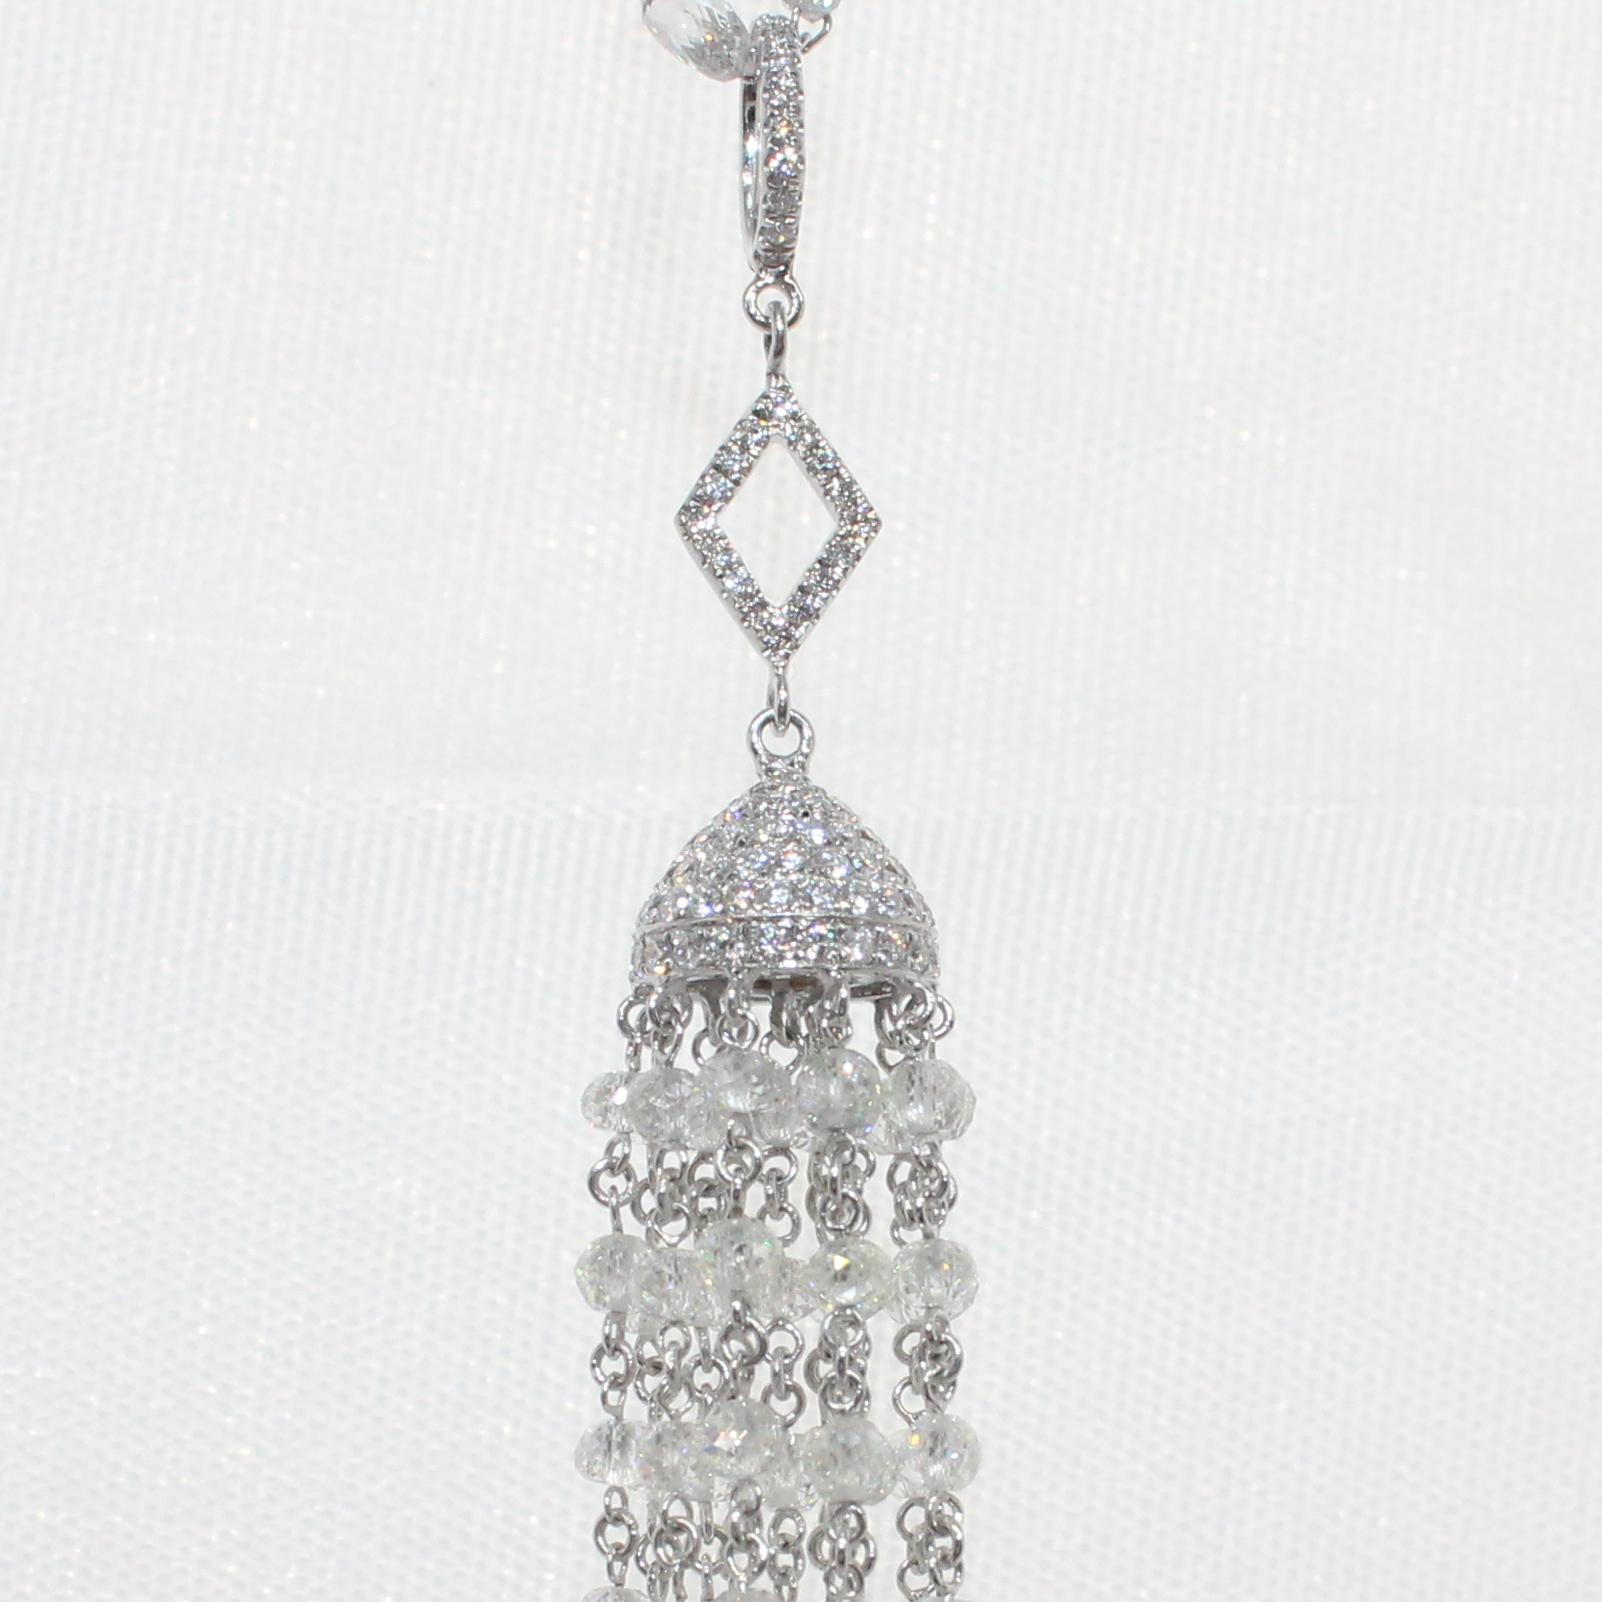 PANIM 14.52 Carat Diamond Beads Tassel Pendant in 18K White Gold

Pendant crafted from Fine Diamond Beads and Small Round Diamonds set in micro pave set for having a look of Classic Tassel Pendant which can be worn everyday as well as for a cocktail